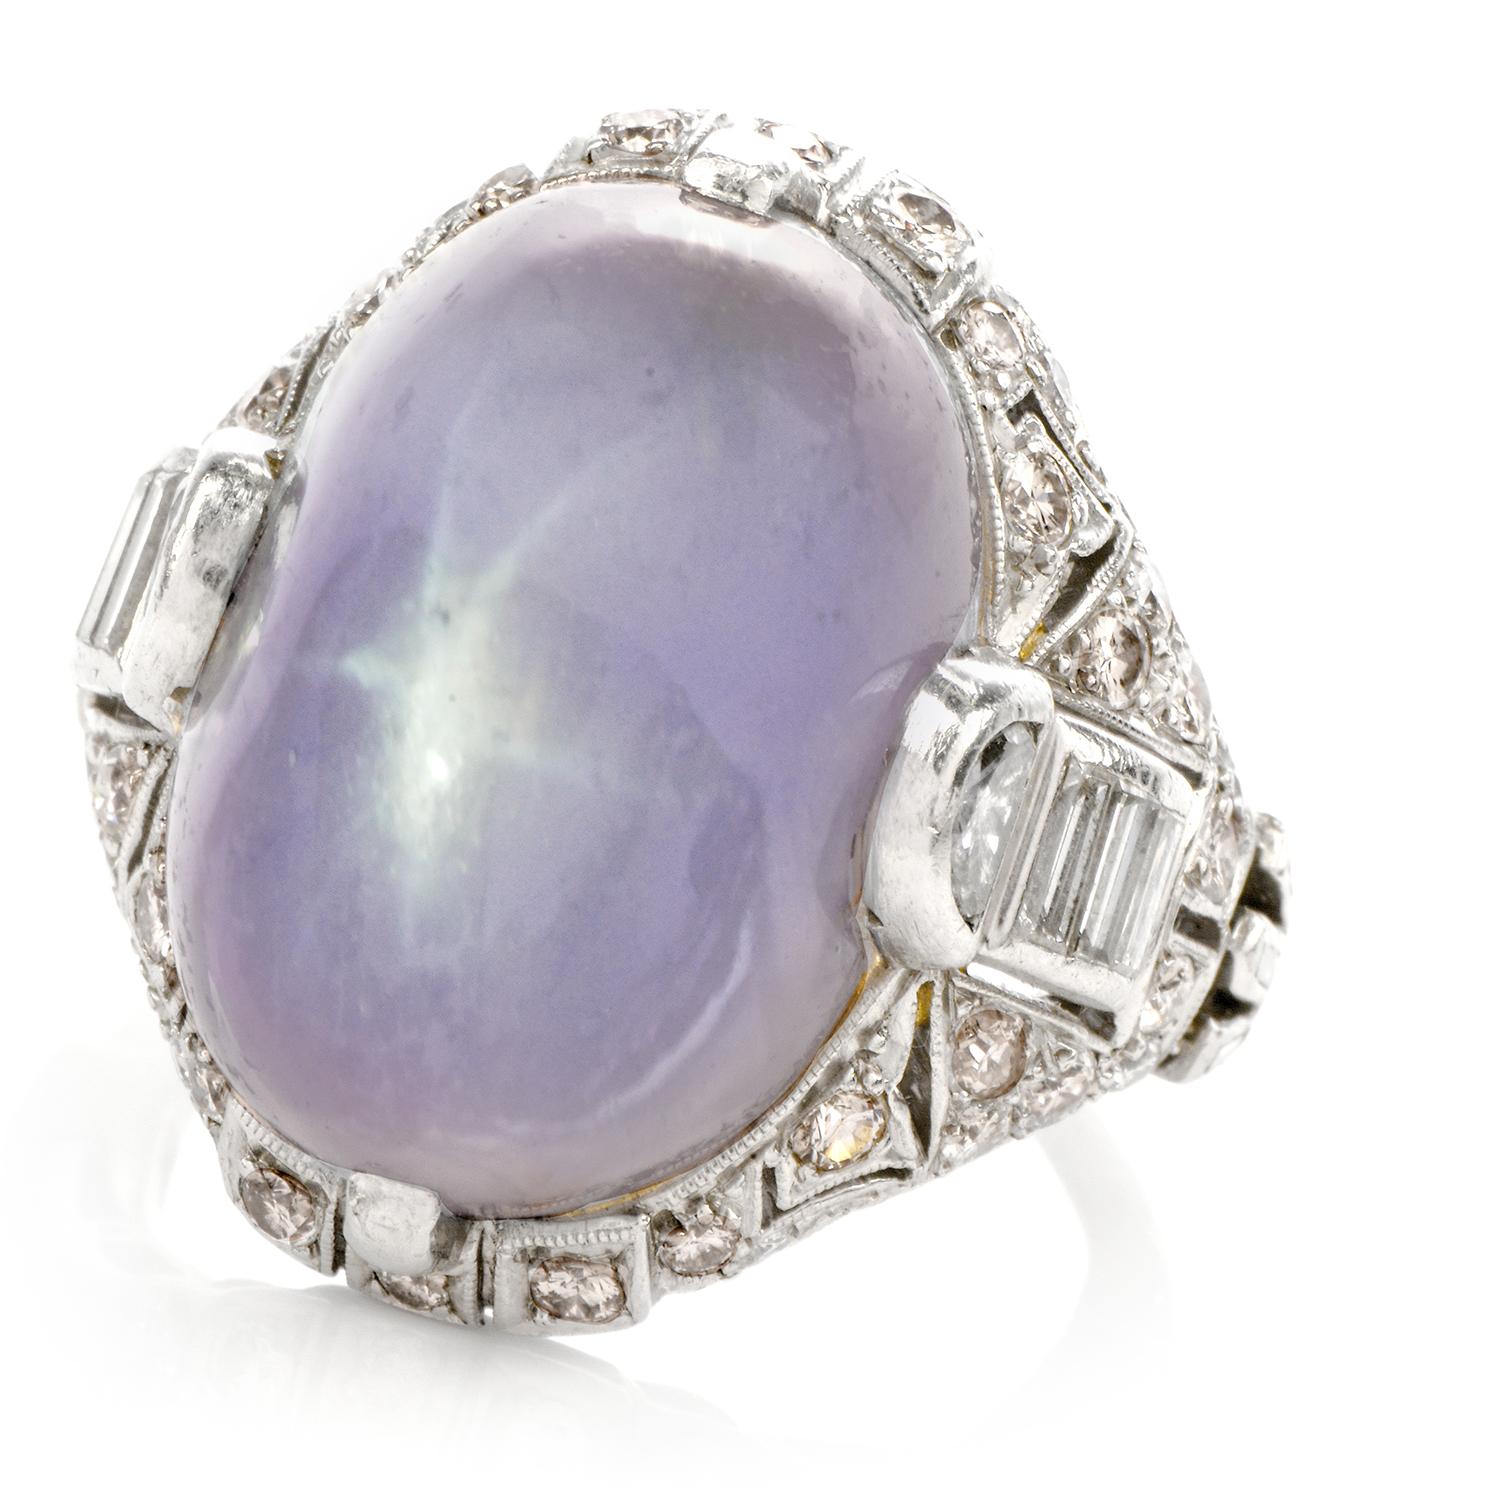 This stunning antique natural art deco lavender genuine star sapphire and diamond ring is crafted in solid platinum, weighing 14 grams and measuring 21mm x 12mm high. Exposing a one prominent prong-set, oval shaped, genuine star sapphire all natural